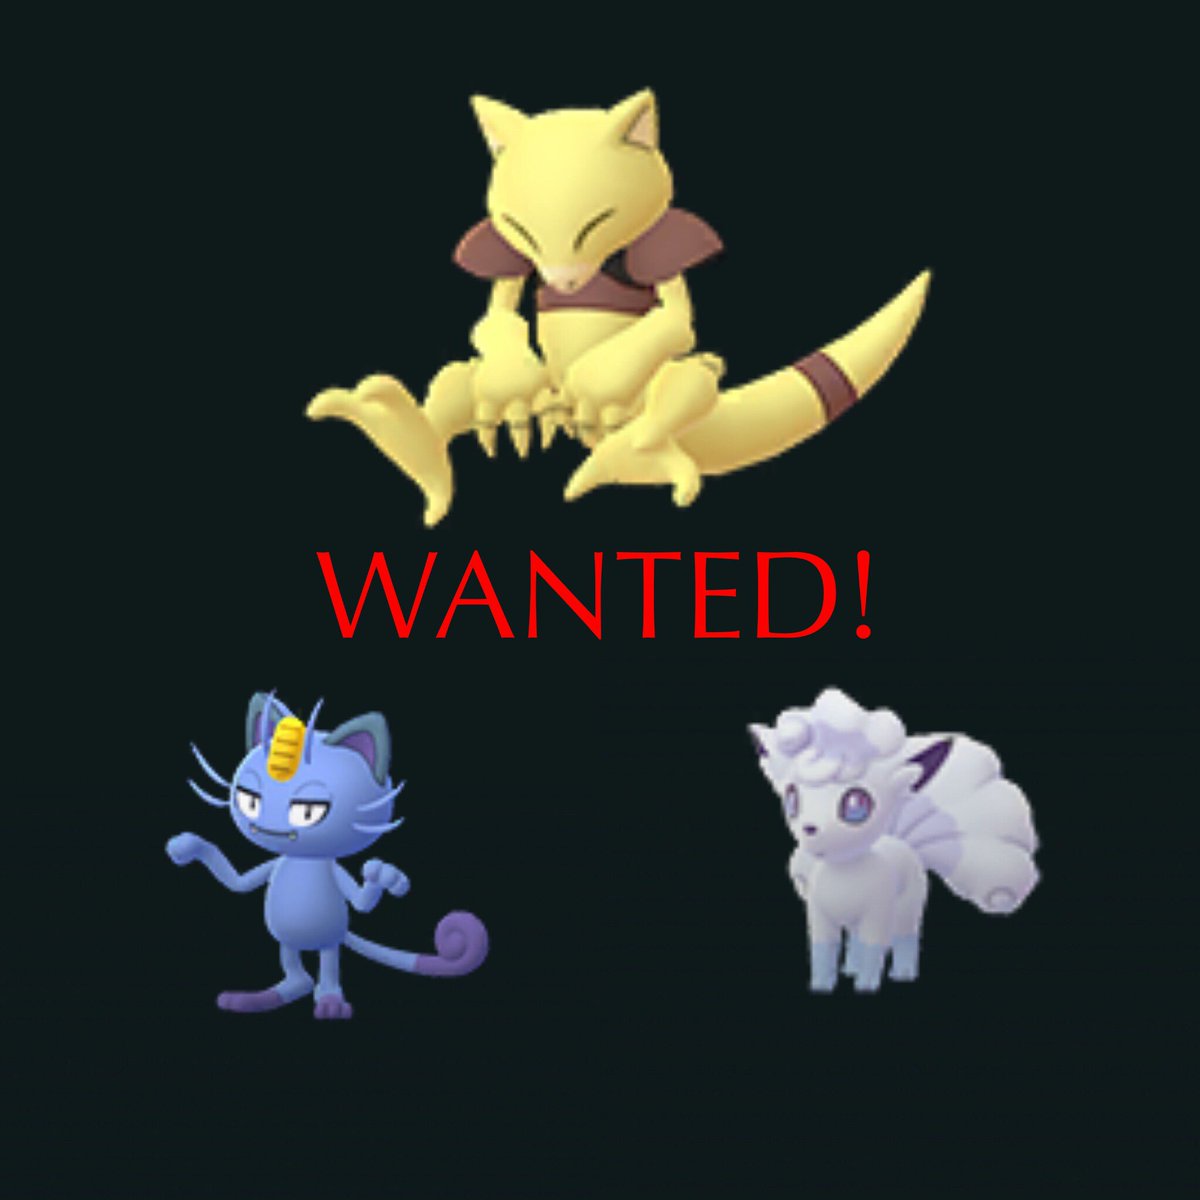 Helsinkitrolli 1 6m Collector Dortmund Go Fest Trade Looking For Shiny Abra Meowth And Vulpix Have Over 100 Shinies Unown D E F H I J L M N O P